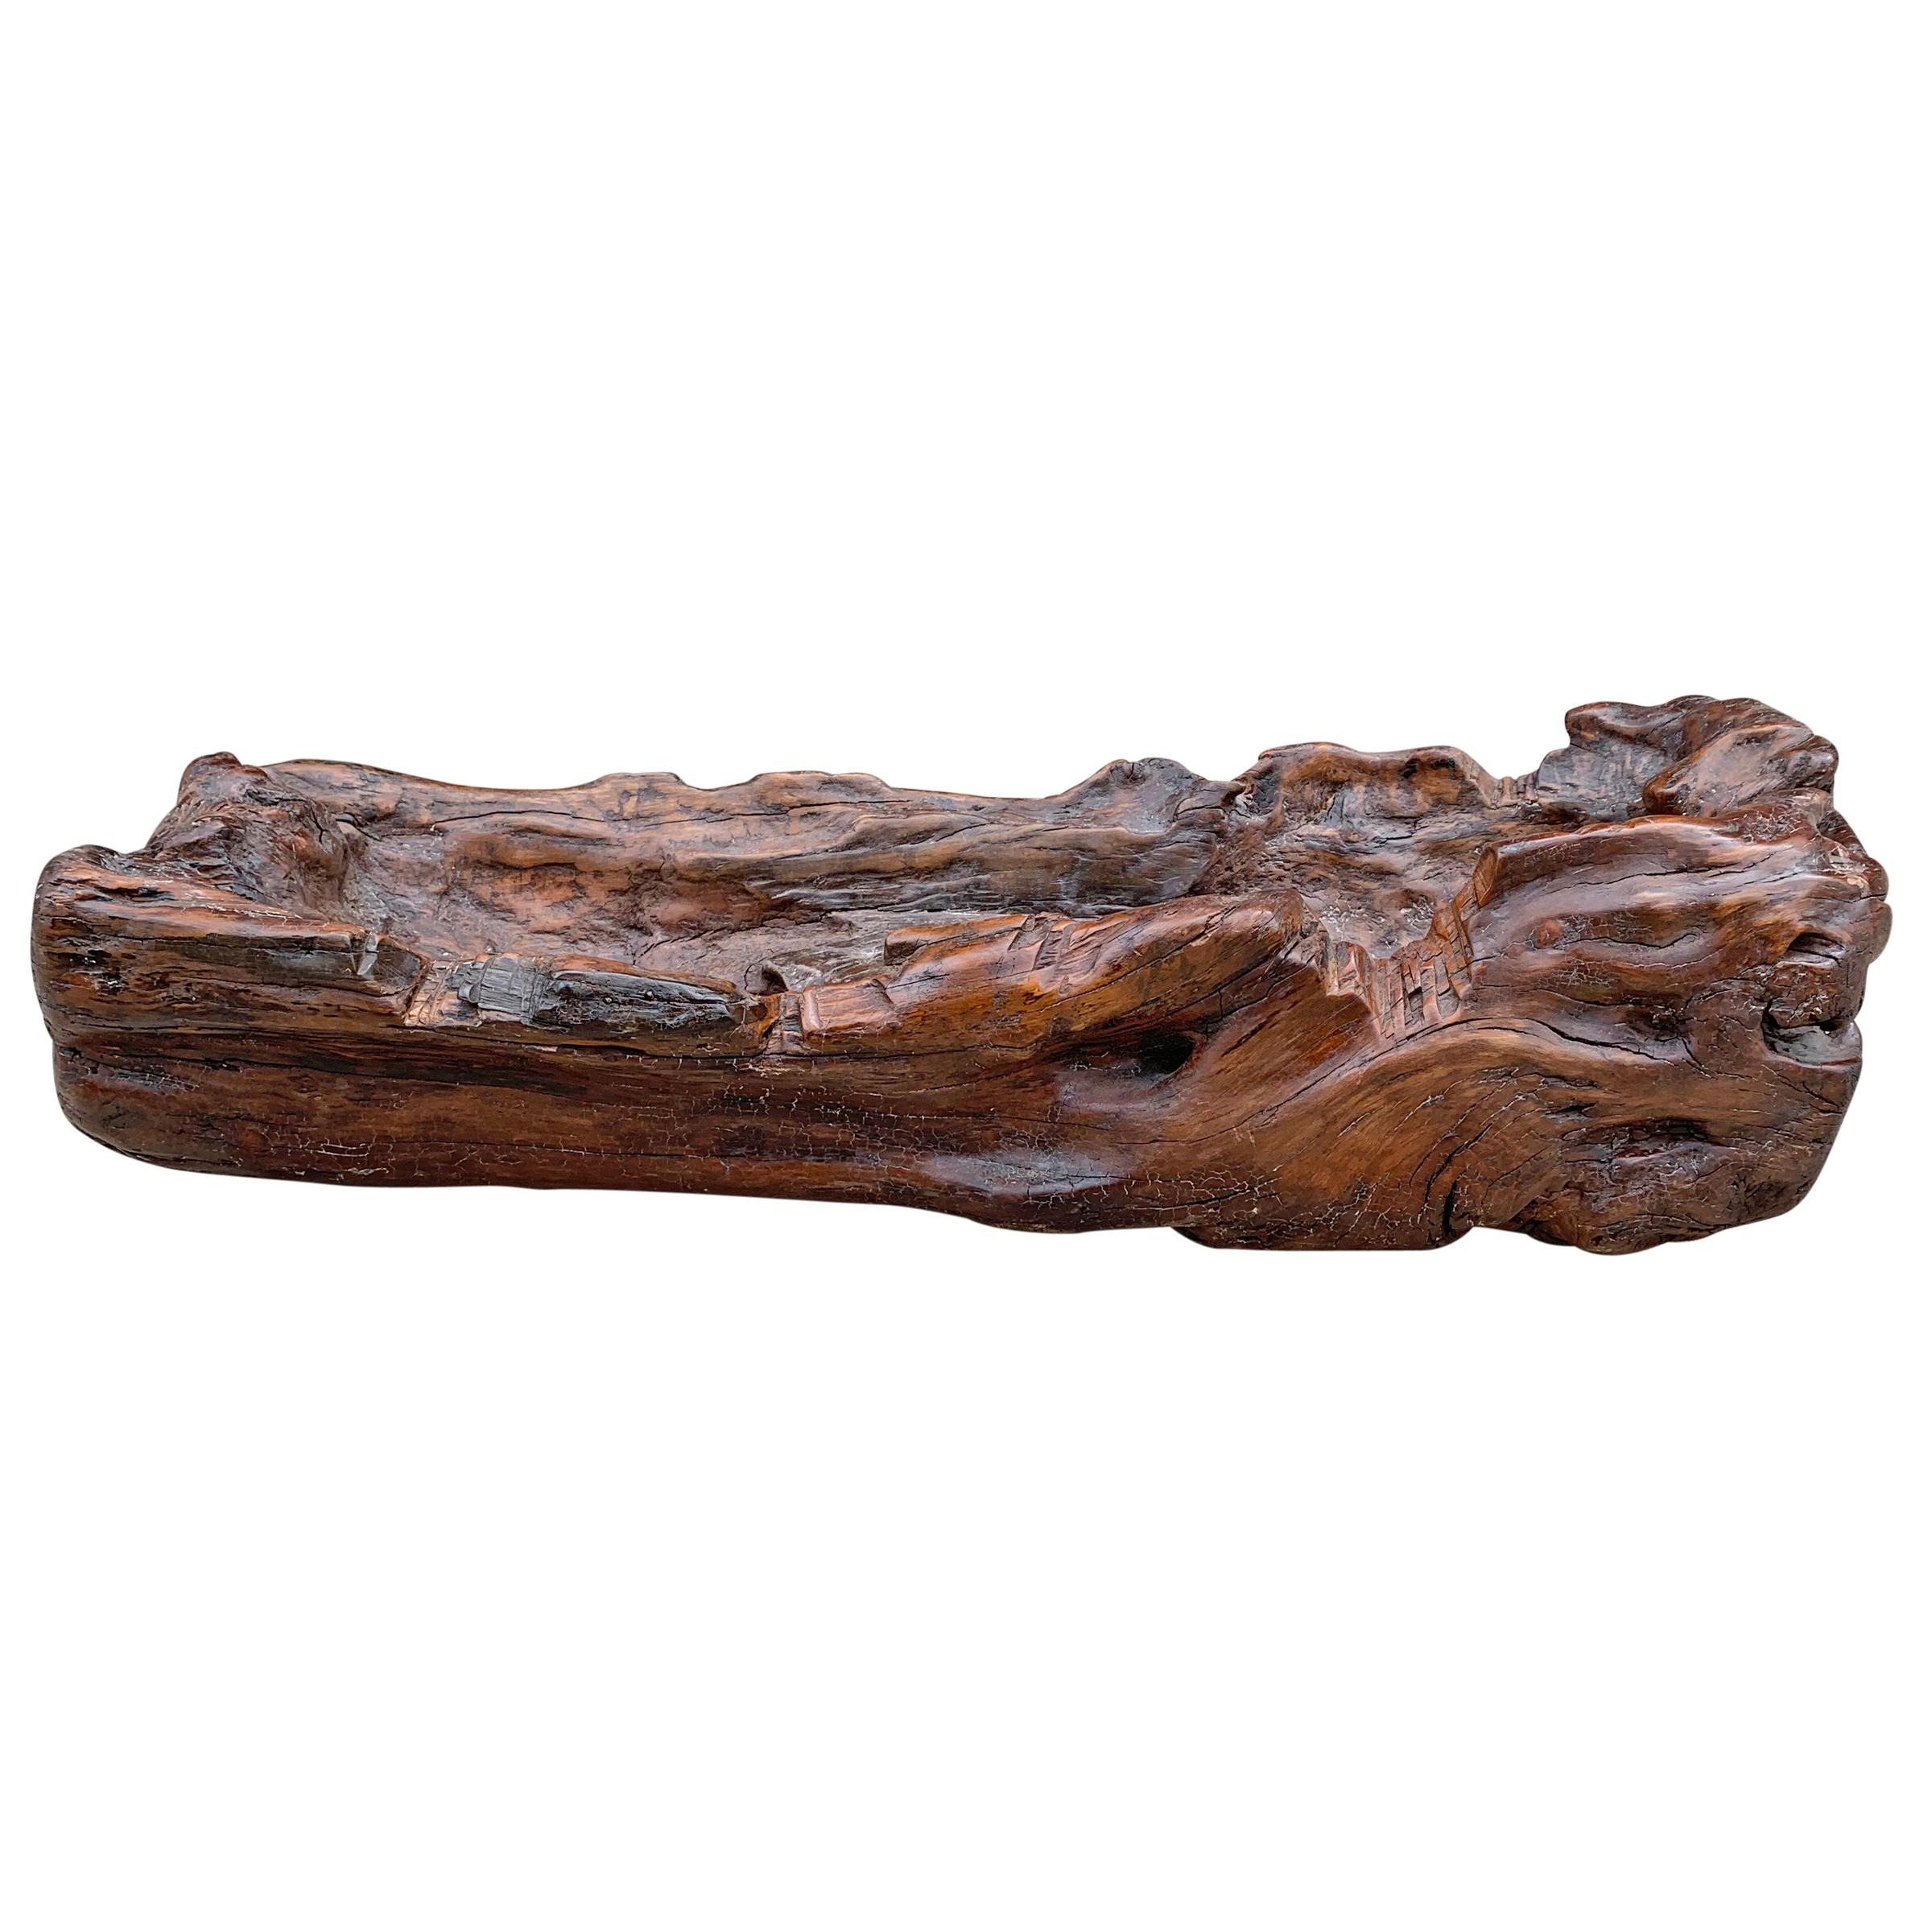 A beautiful 19th century Primitive wood trough used to feed livestock, carved from a hollowed out log, with a wonderful patina. Would make an excellent catchall, planter, or serving vessel at your next party.